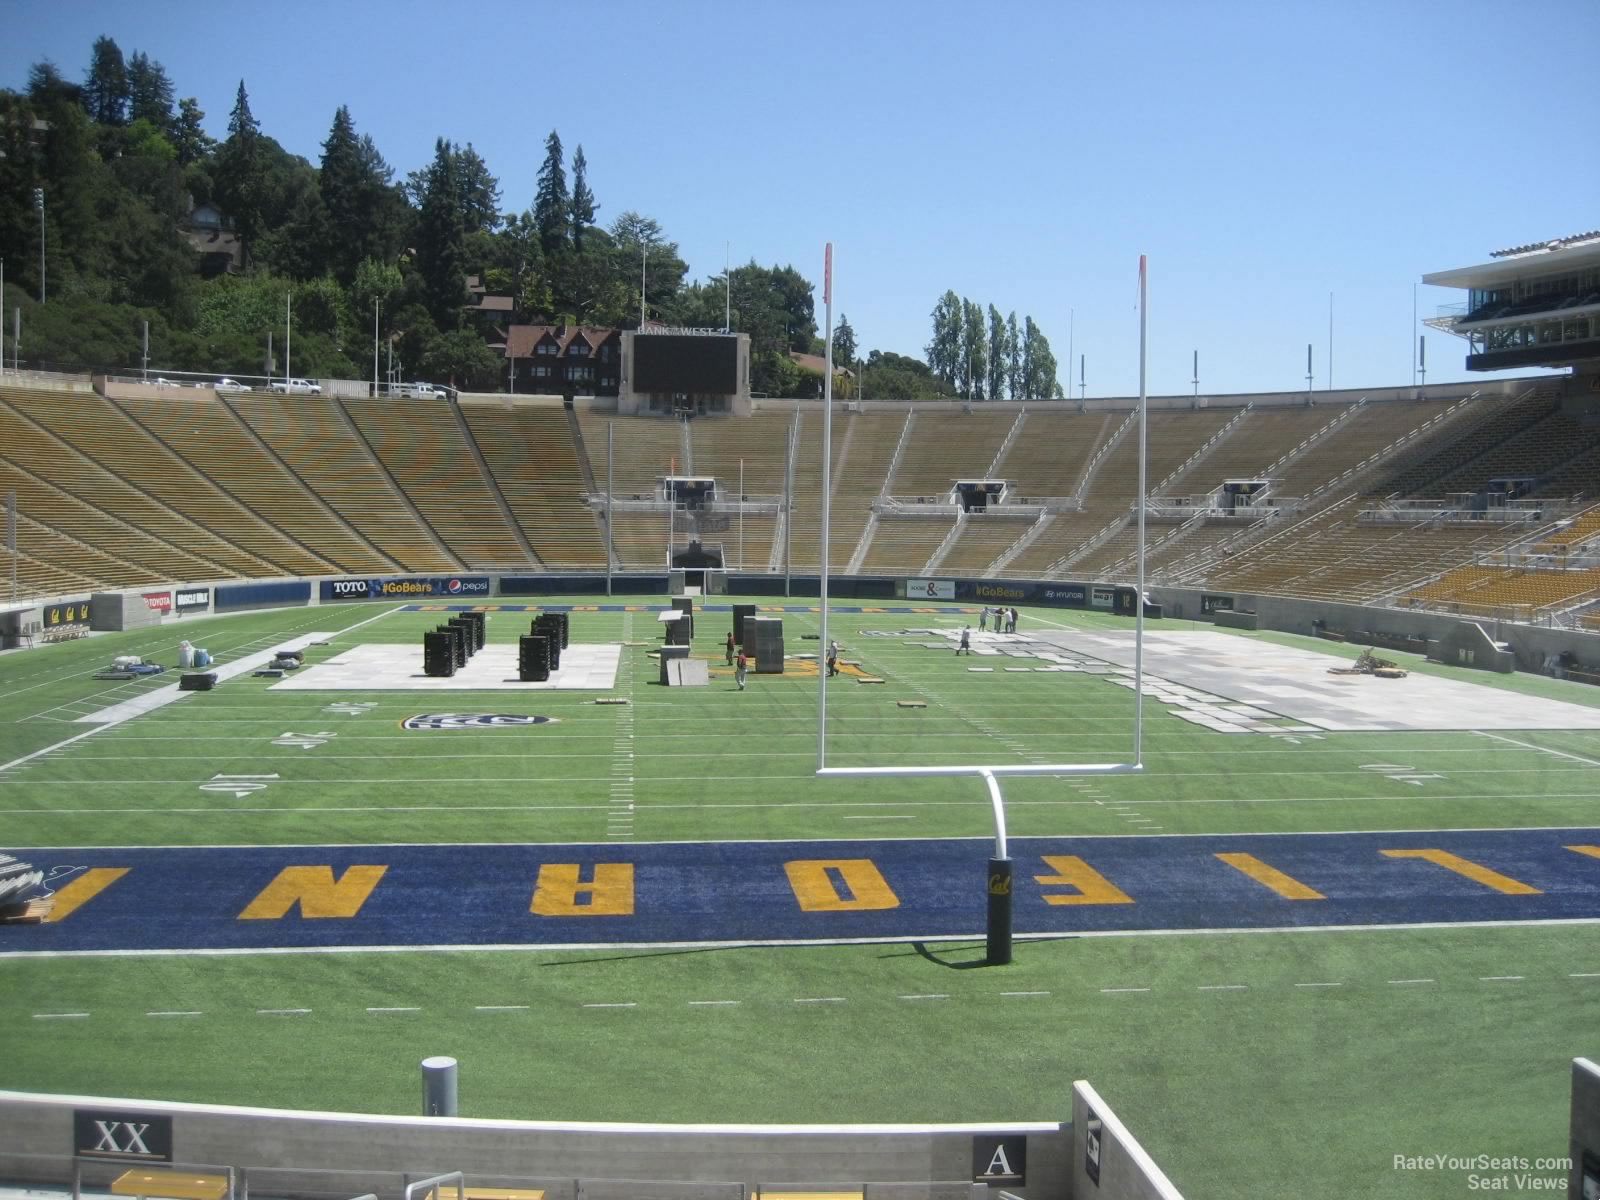 section a, row 22 seat view  - memorial stadium (cal)